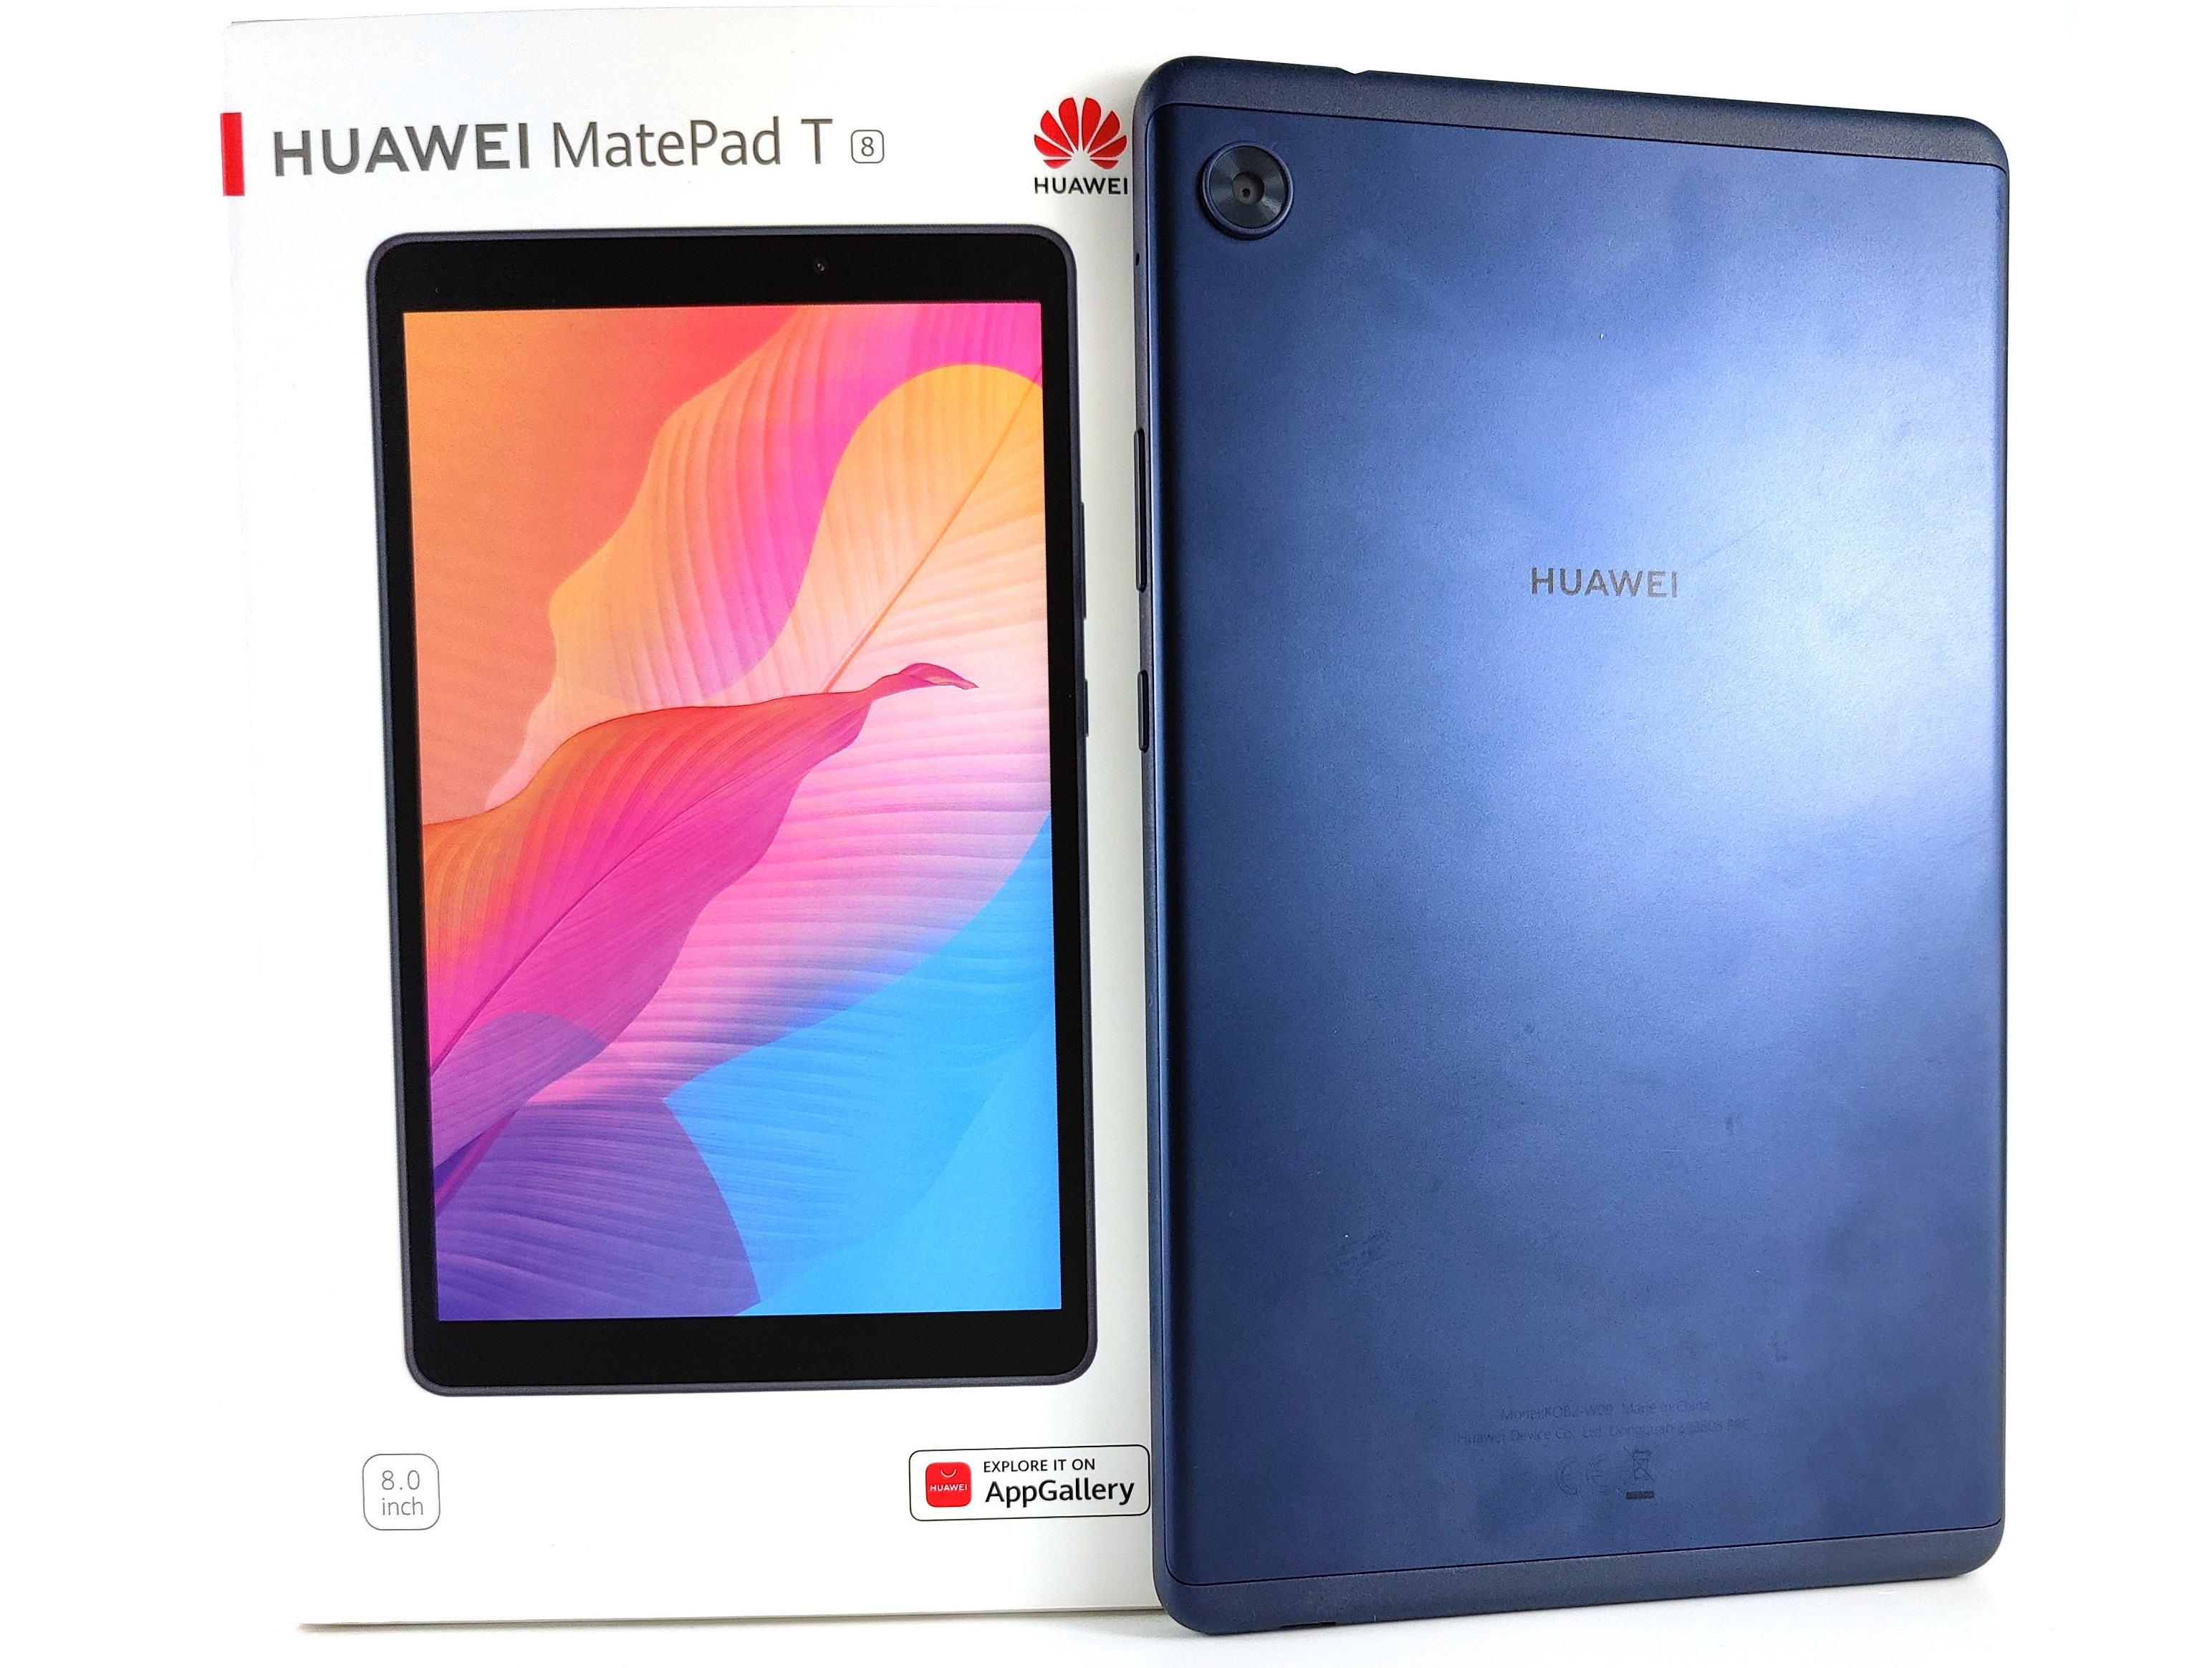 Helder op Vader Ontwaken Huawei MatePad T8 Tablet Review - Is the 99-Euro (~$117) tablet worth it? -  NotebookCheck.net Reviews